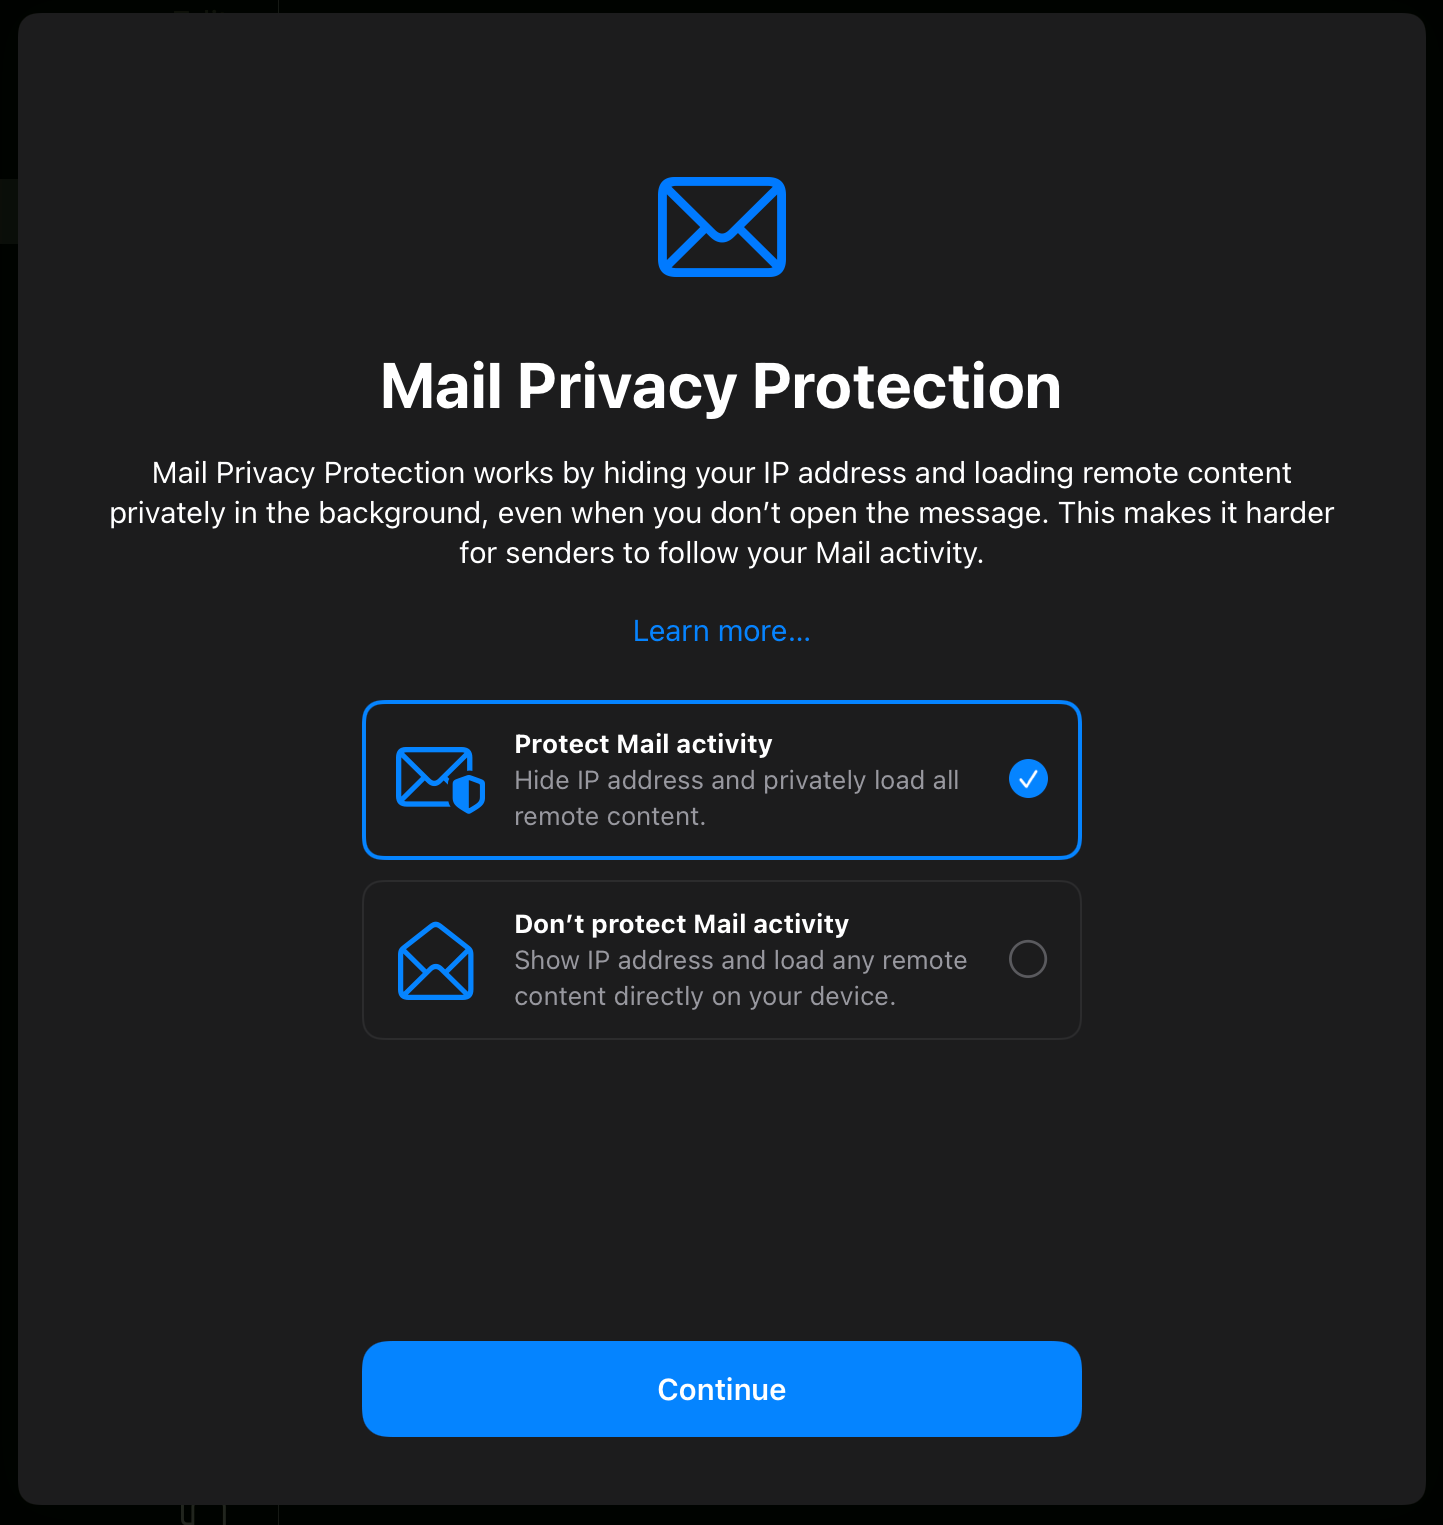 apple's mail privacy protection opt-in screen for iPad